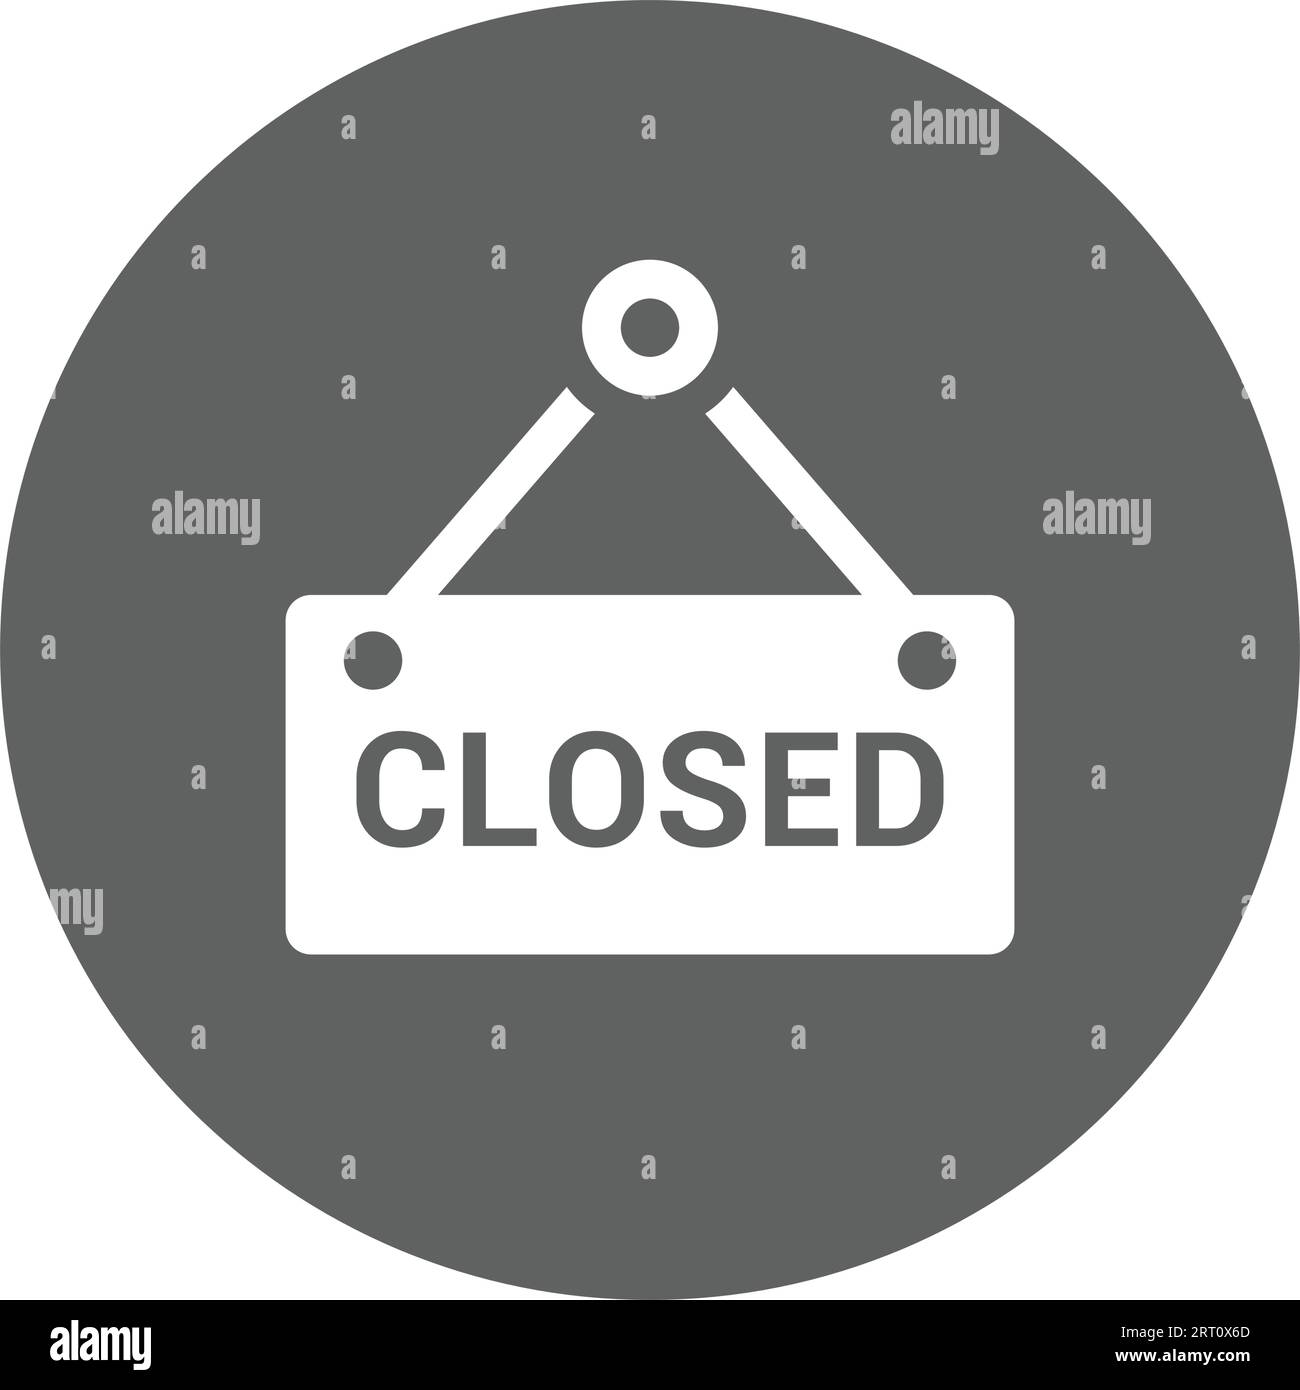 Shopping Closed icon. Fully editable vector EPS use for printed materials and infographics, web or any kind of design project. Stock Vector